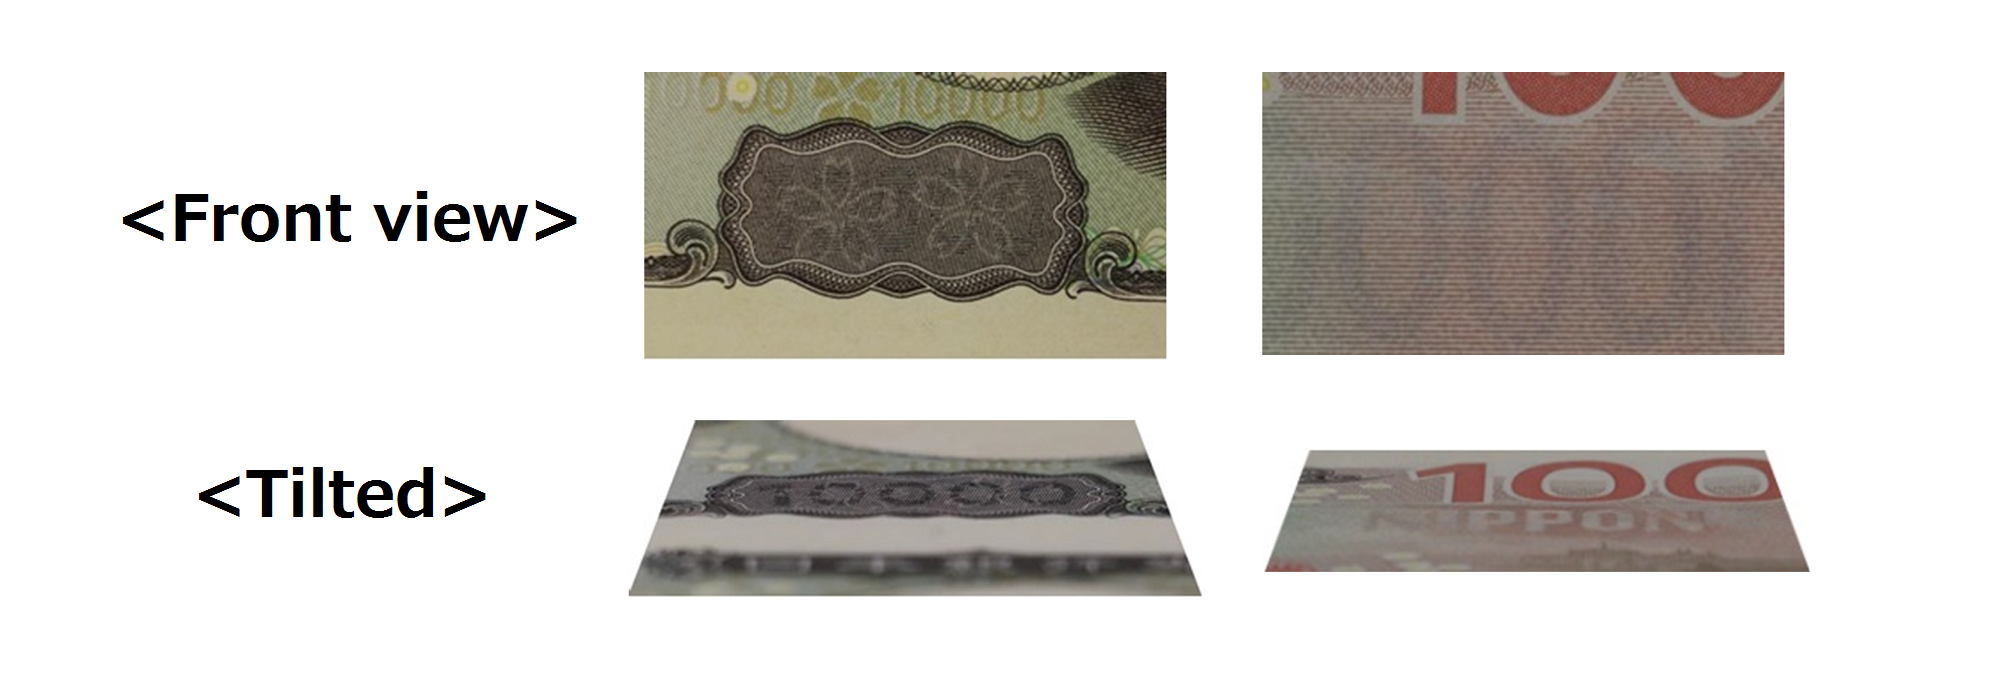 Images of latent patterns on both the front and back of the 10,000 yen note when viewed straight on, and how numerals or letters appear when tilted.